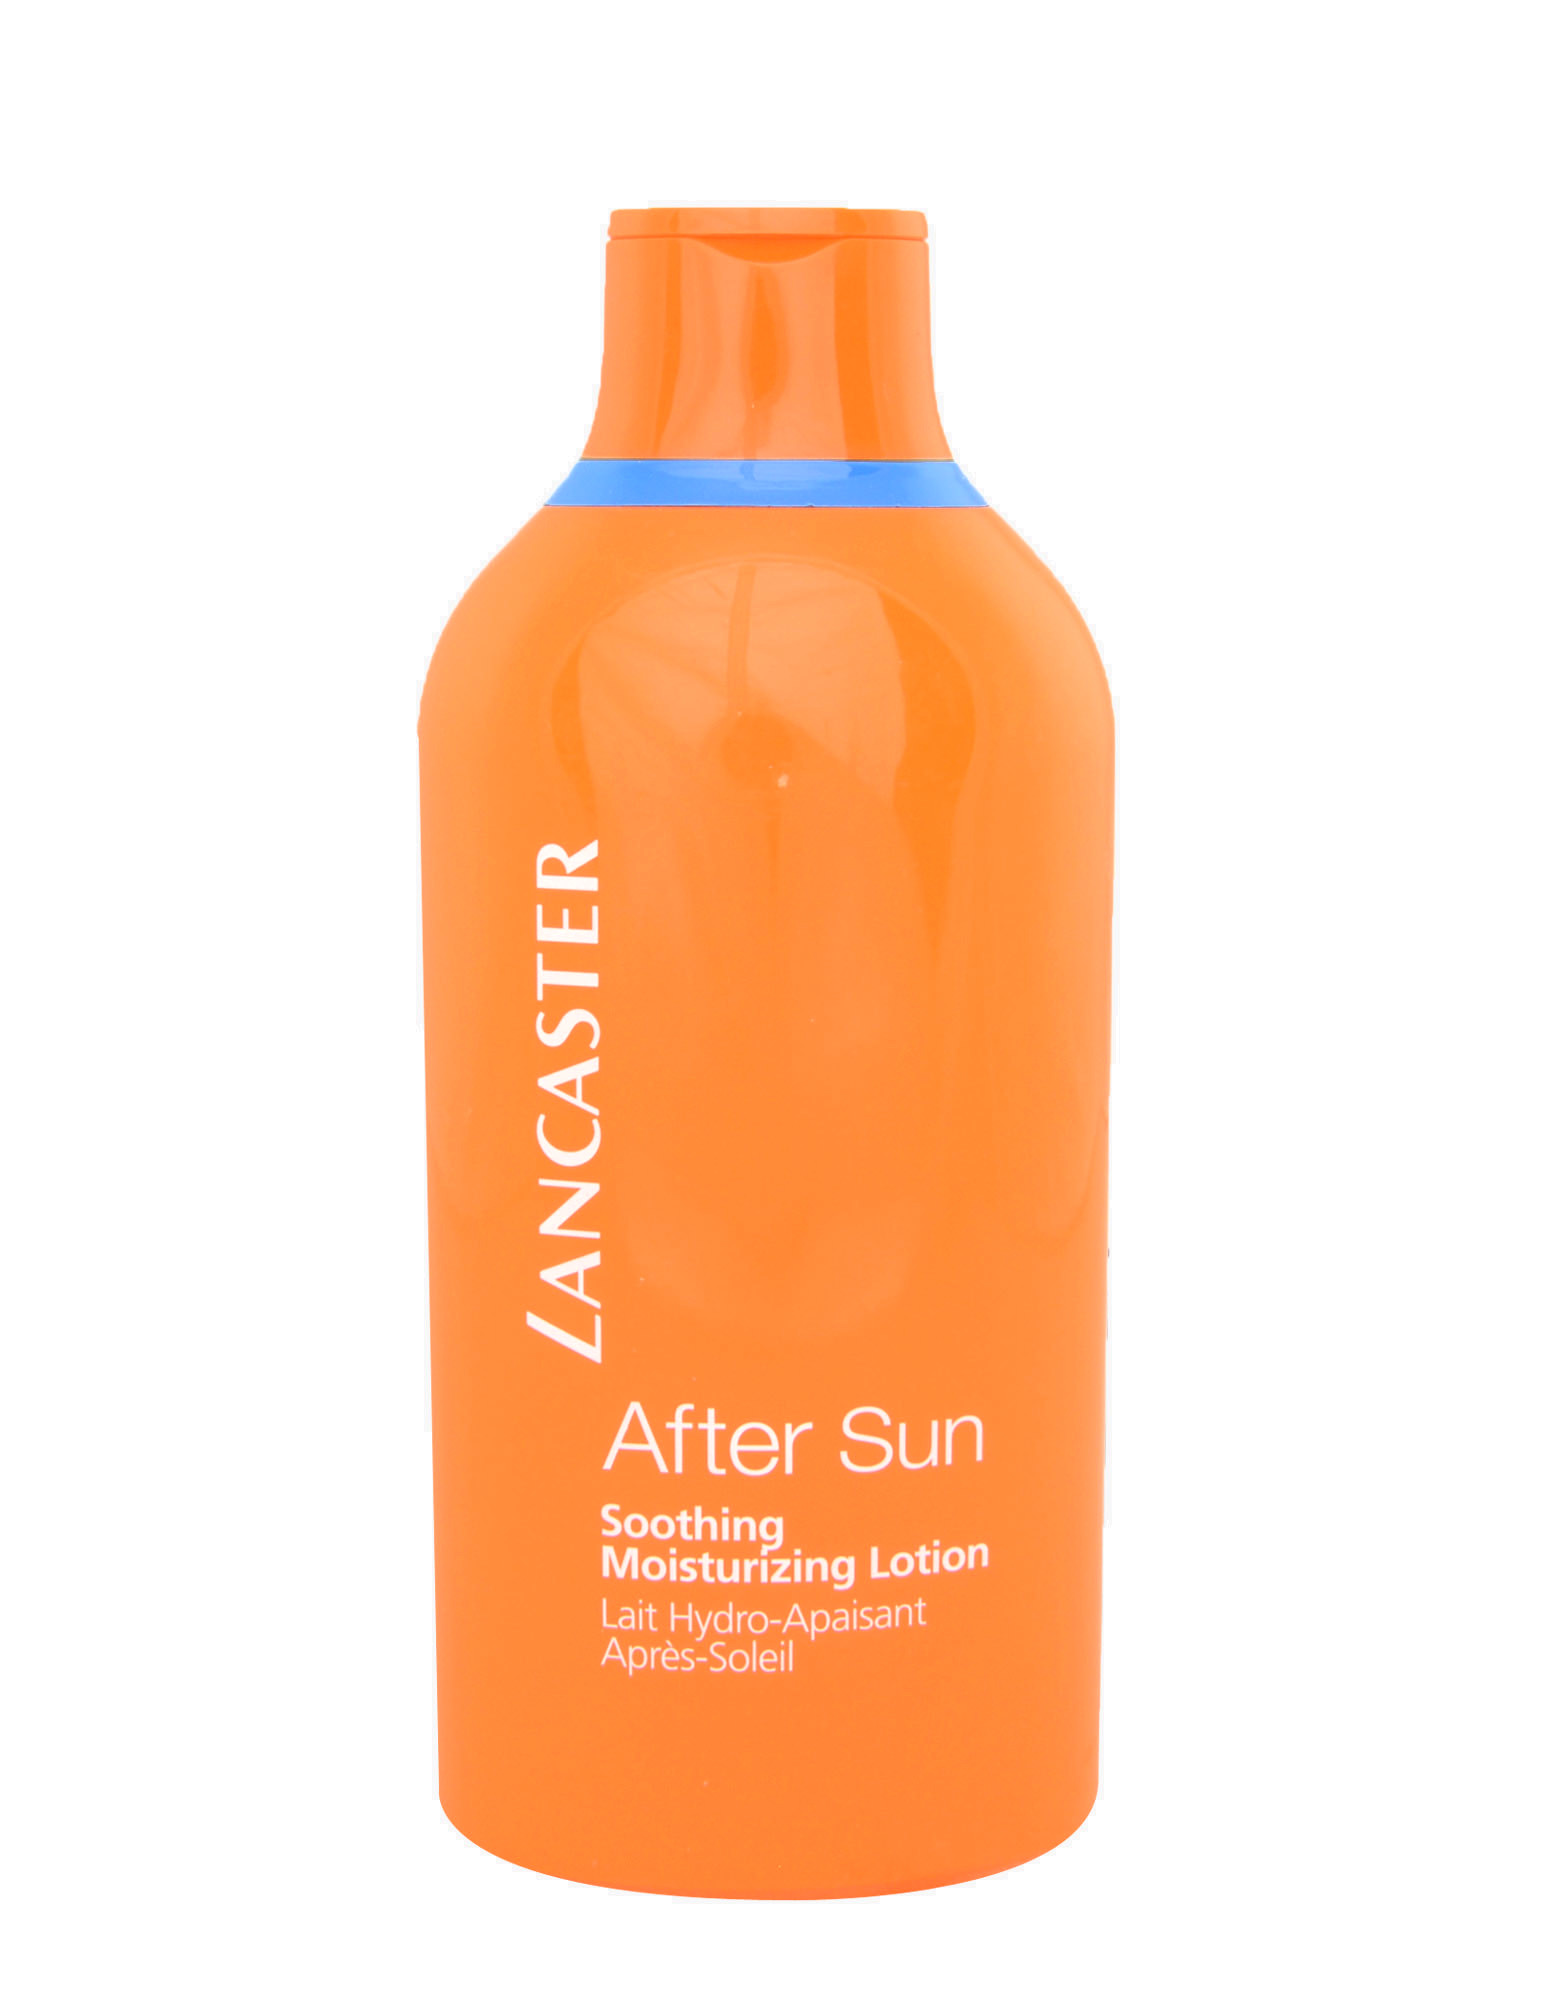 After Sun - Soothing Moisturizing Lotion by LANCASTER (400ml)